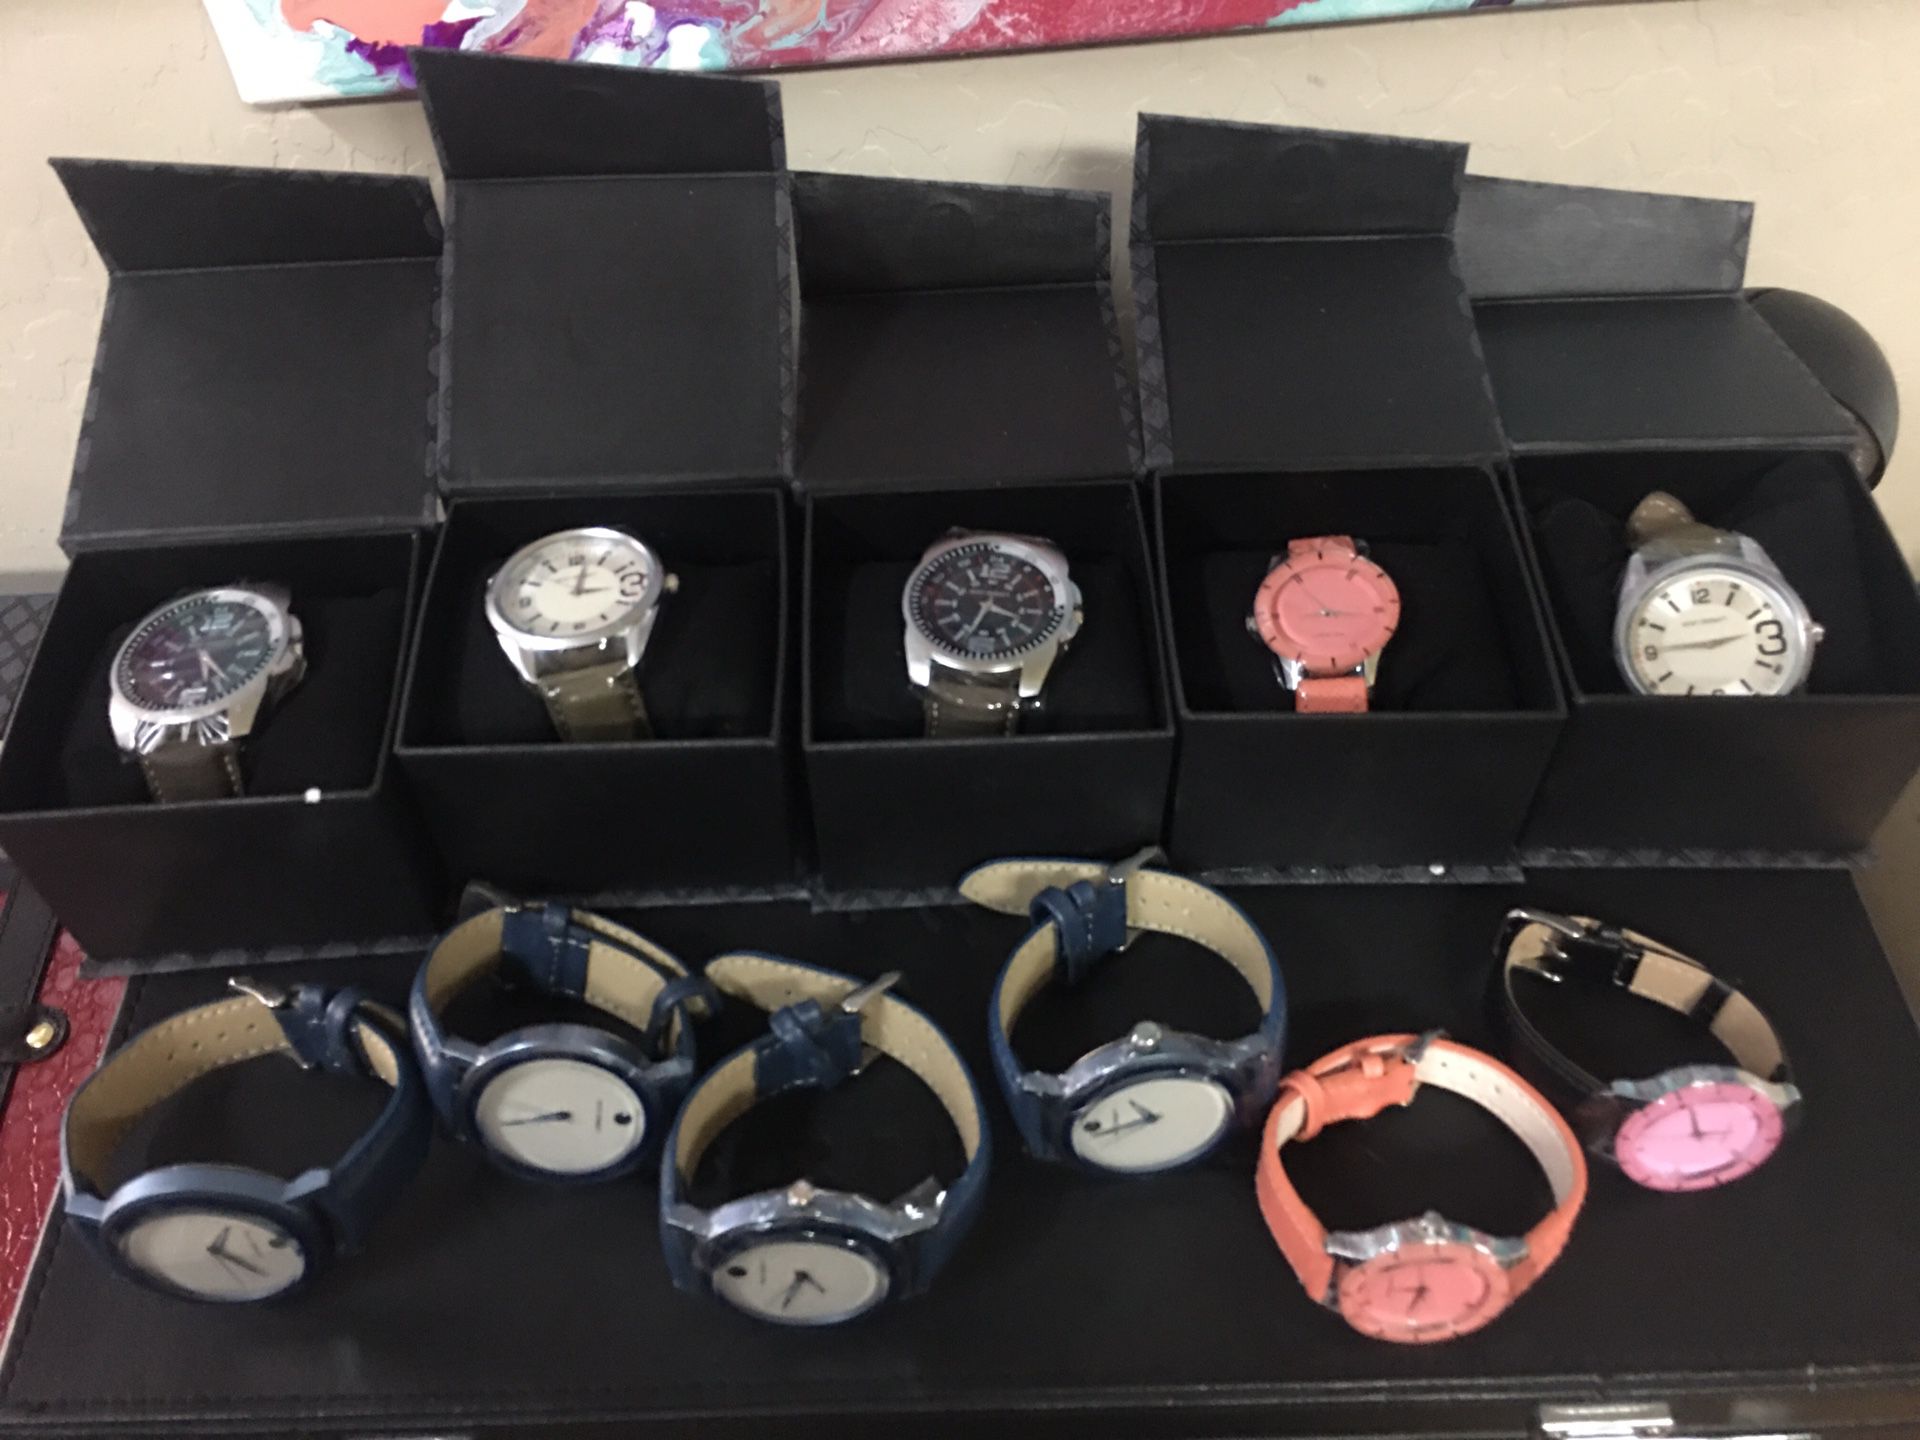 60 Brand New Fashion Watches for $100 Closeout